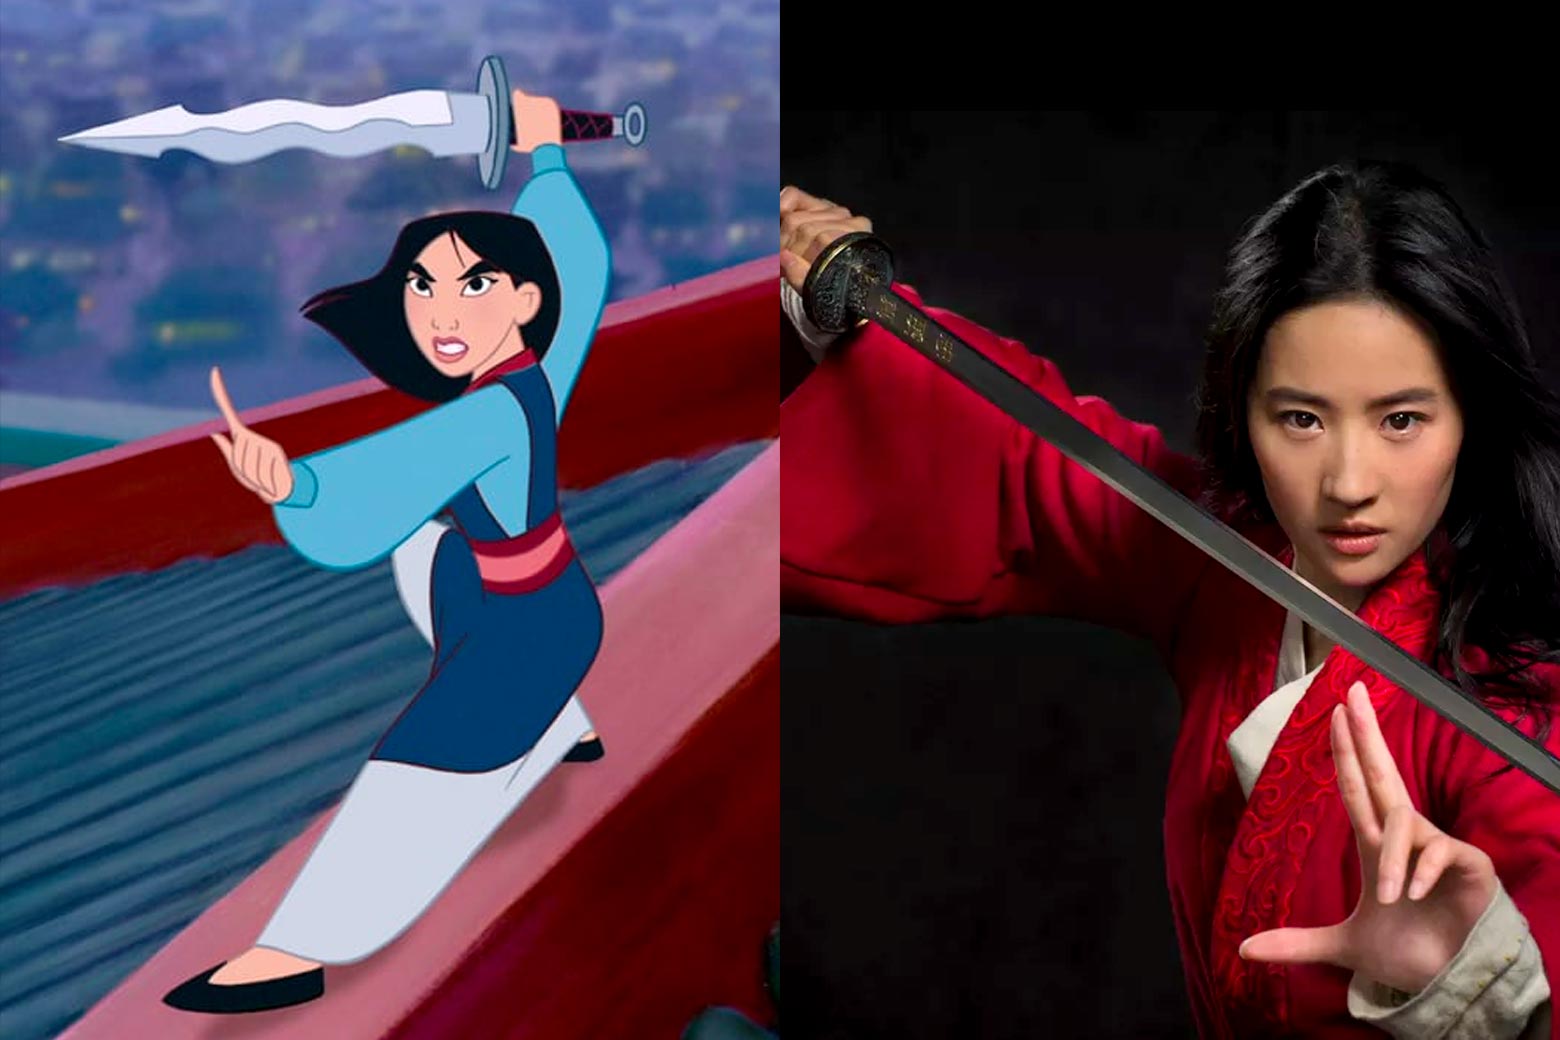 Mulan in the 1998 animated film, and Liu Yifei as Mulan in the 2020 remake.